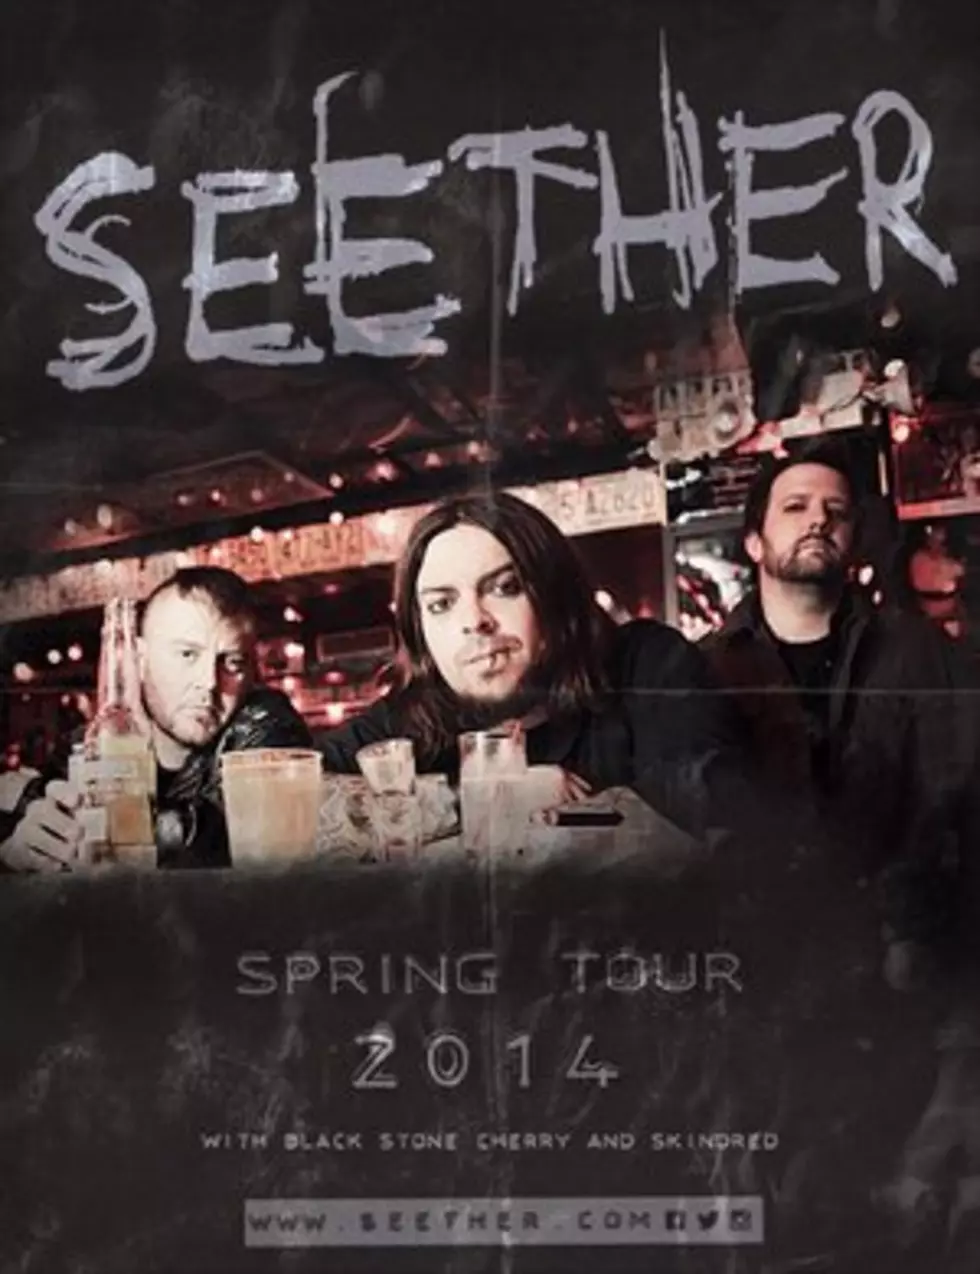 Seether Unveil Dates for Spring 2014 Headlining U.S. Tour With Black Stone Cherry + Skindred